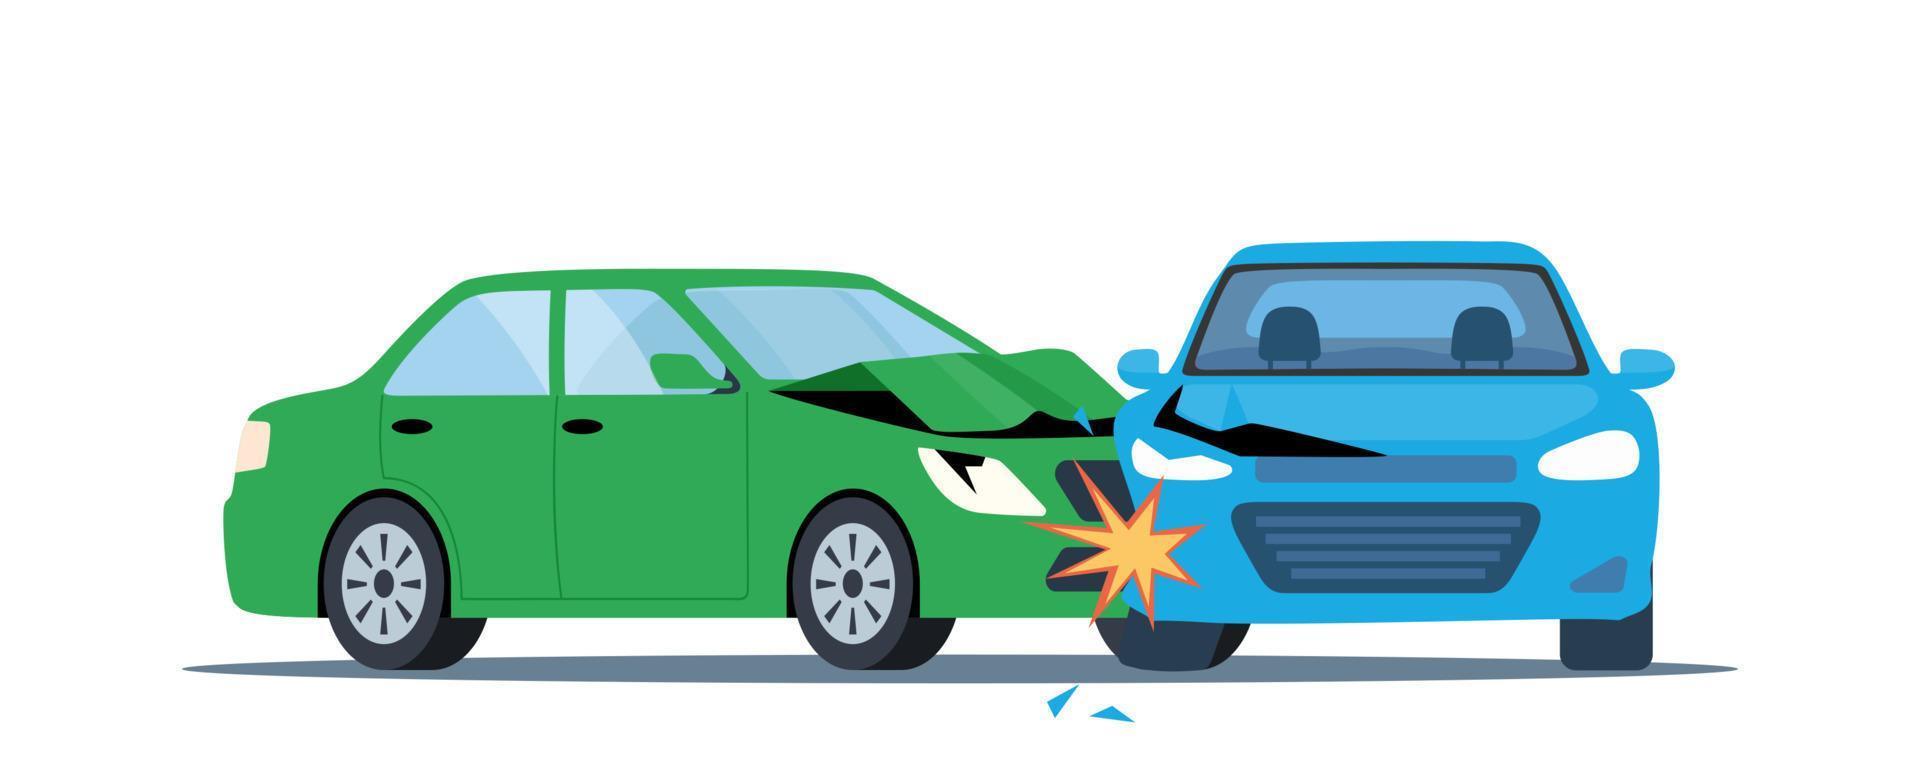 Car accident. Damaged transport on the road. Collision of two cars, side view. Road collisition. Damaged transport. Collision on road, safety of driving personal vehicles, car insurance. Vector. vector